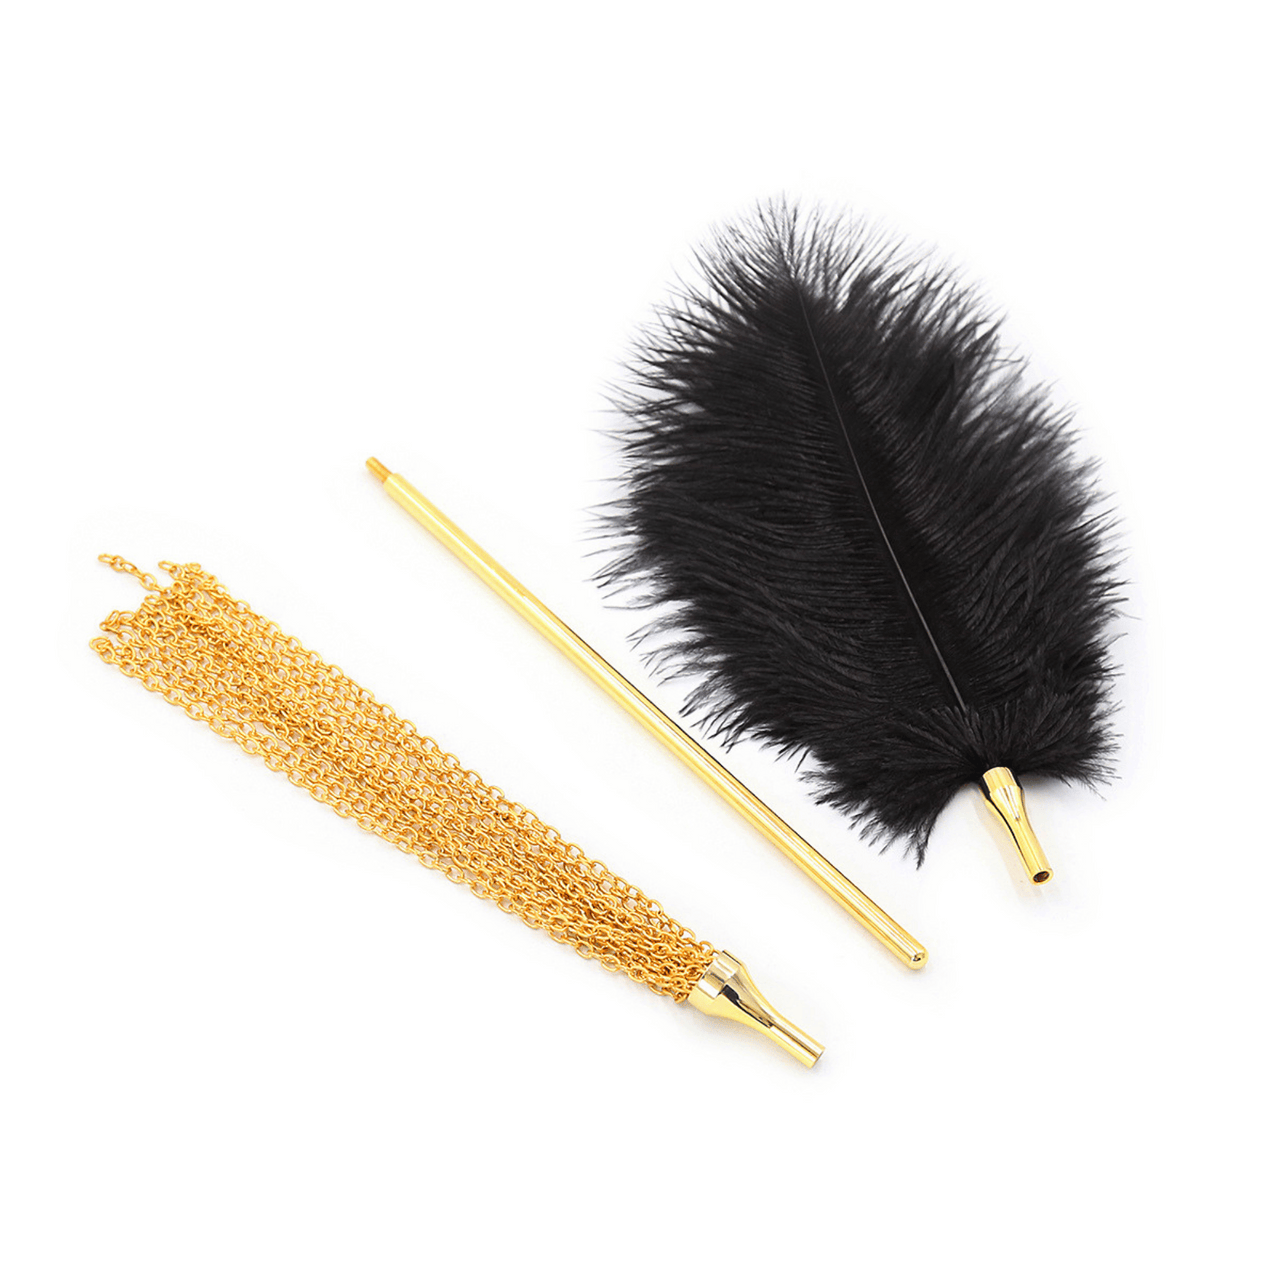 Luxury Pleasure Pain Feather Tickler with Interchangeable Gold Handle and Flogger Attachment Elegant Metal Gold Tassels for Enhanced Sensory Play